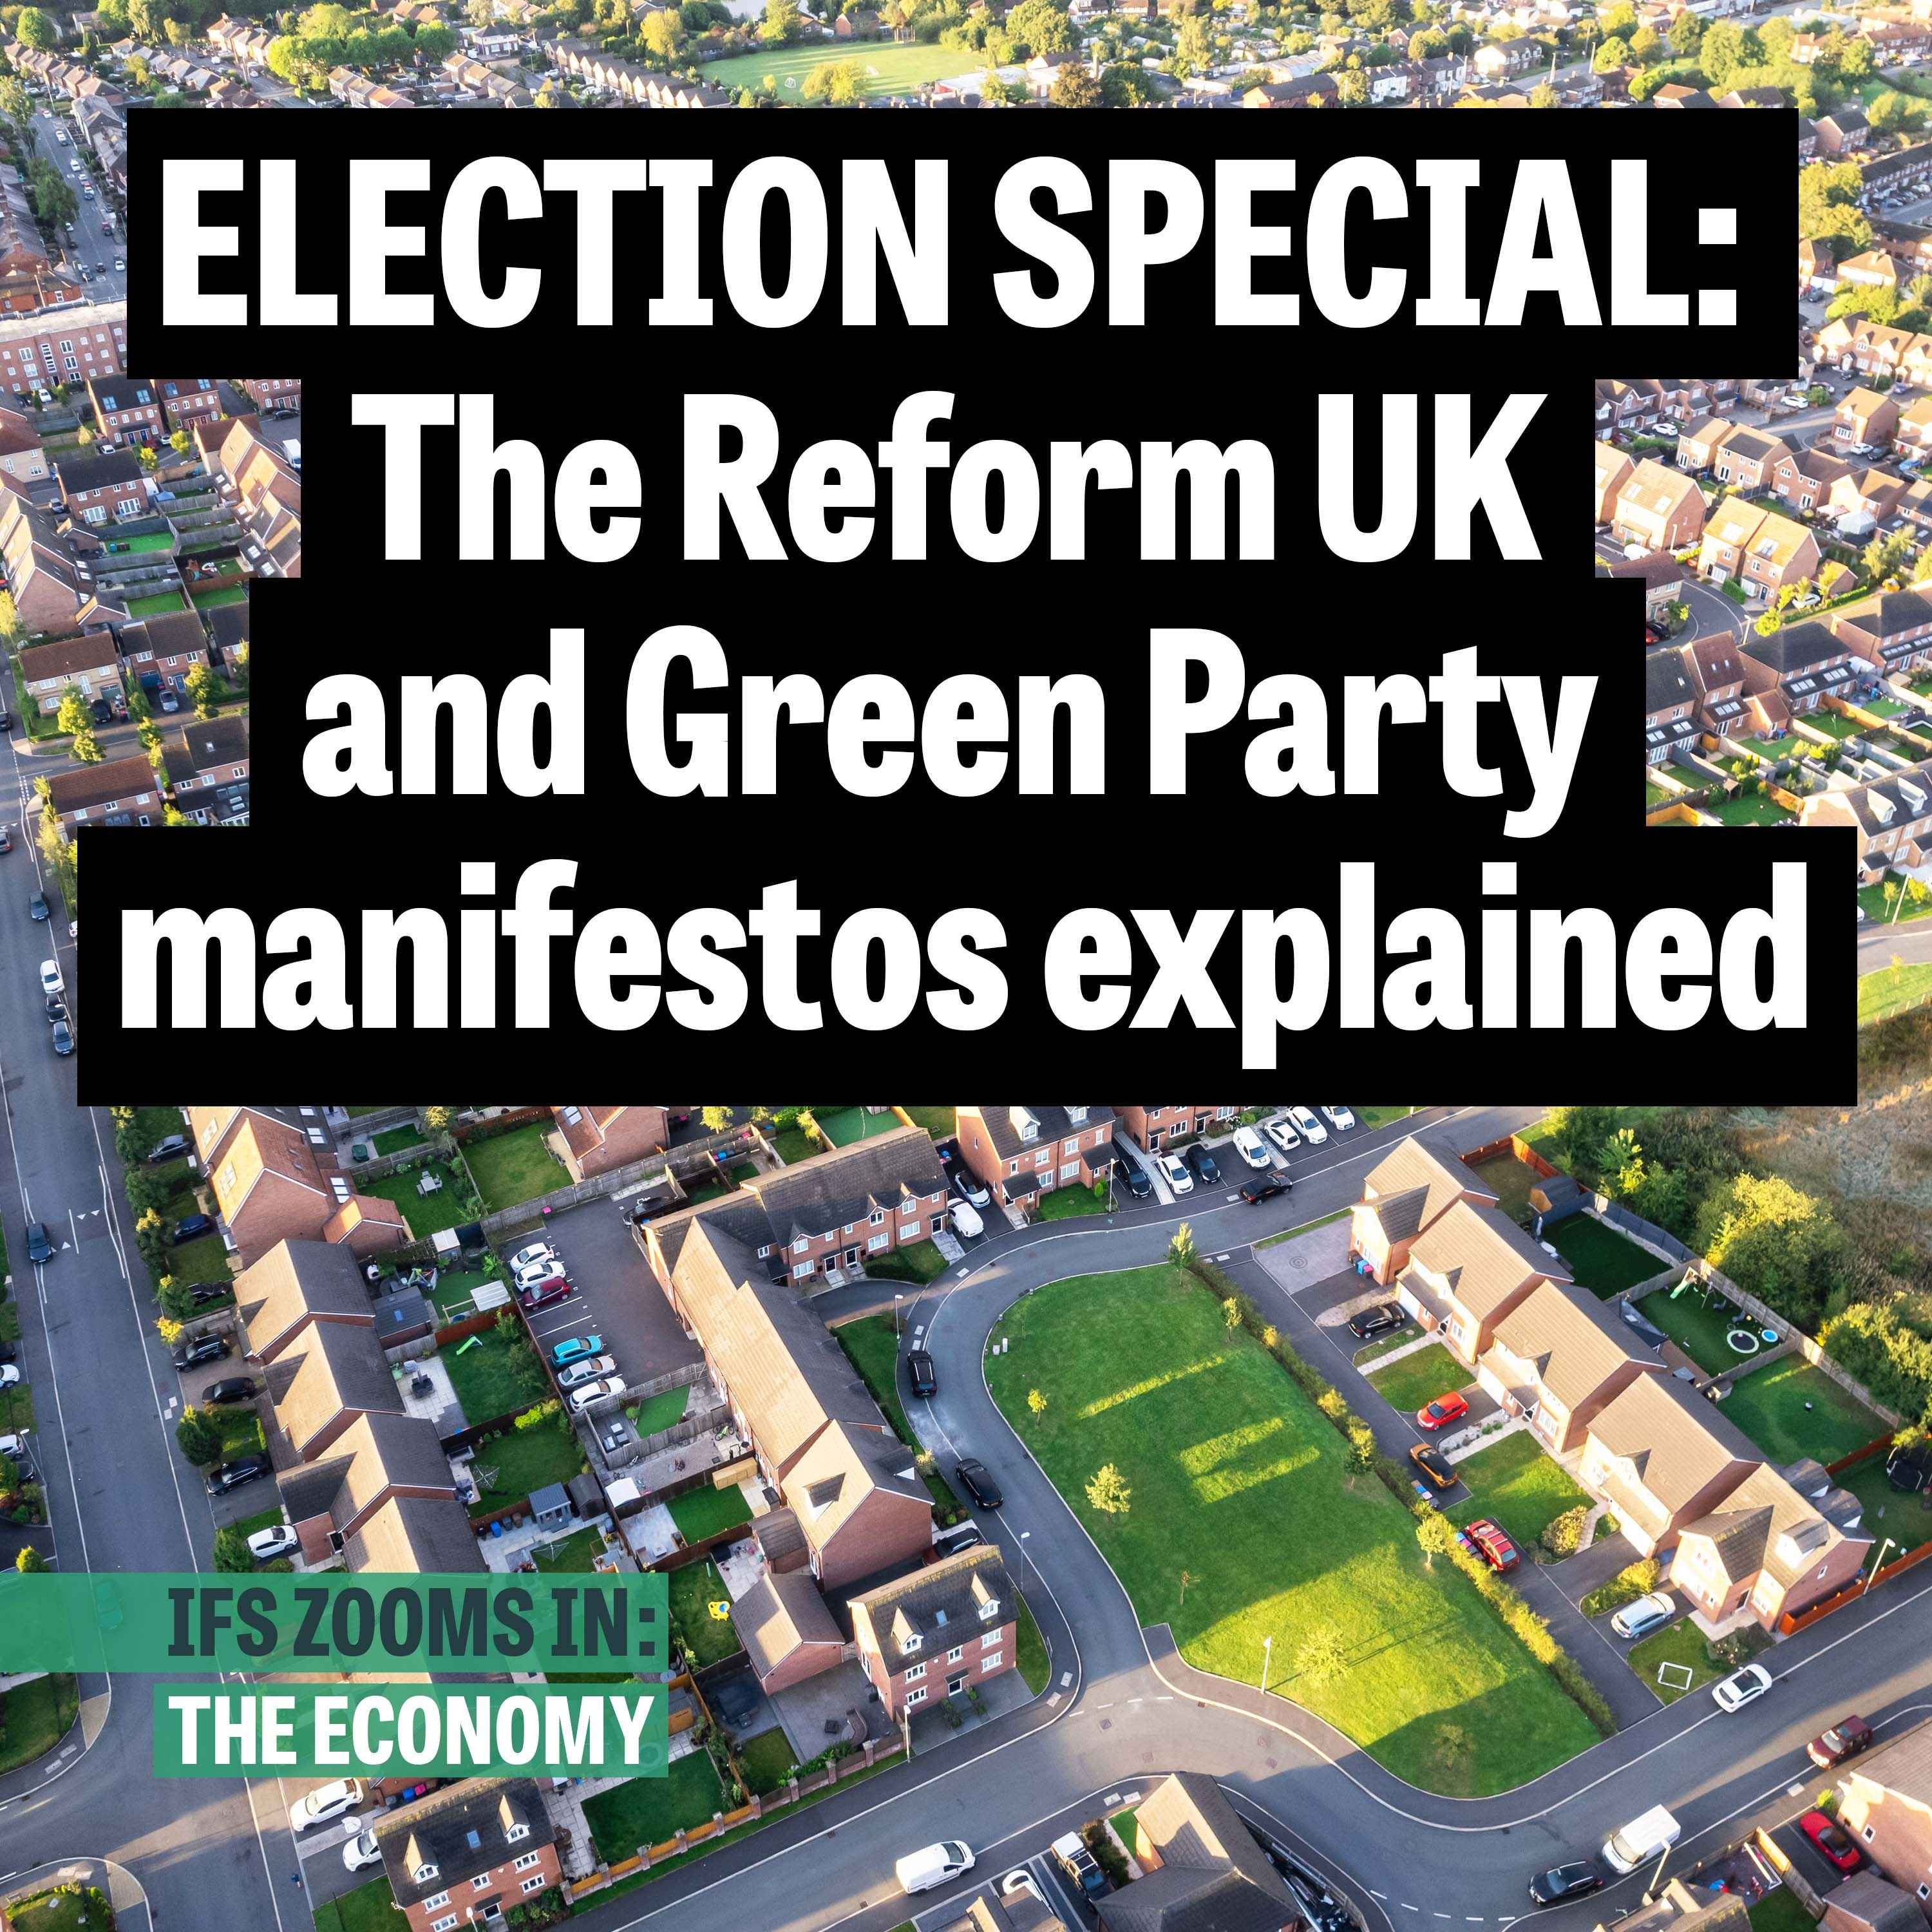 ELECTION SPECIAL: The Reform UK and Green Party manifestos explained